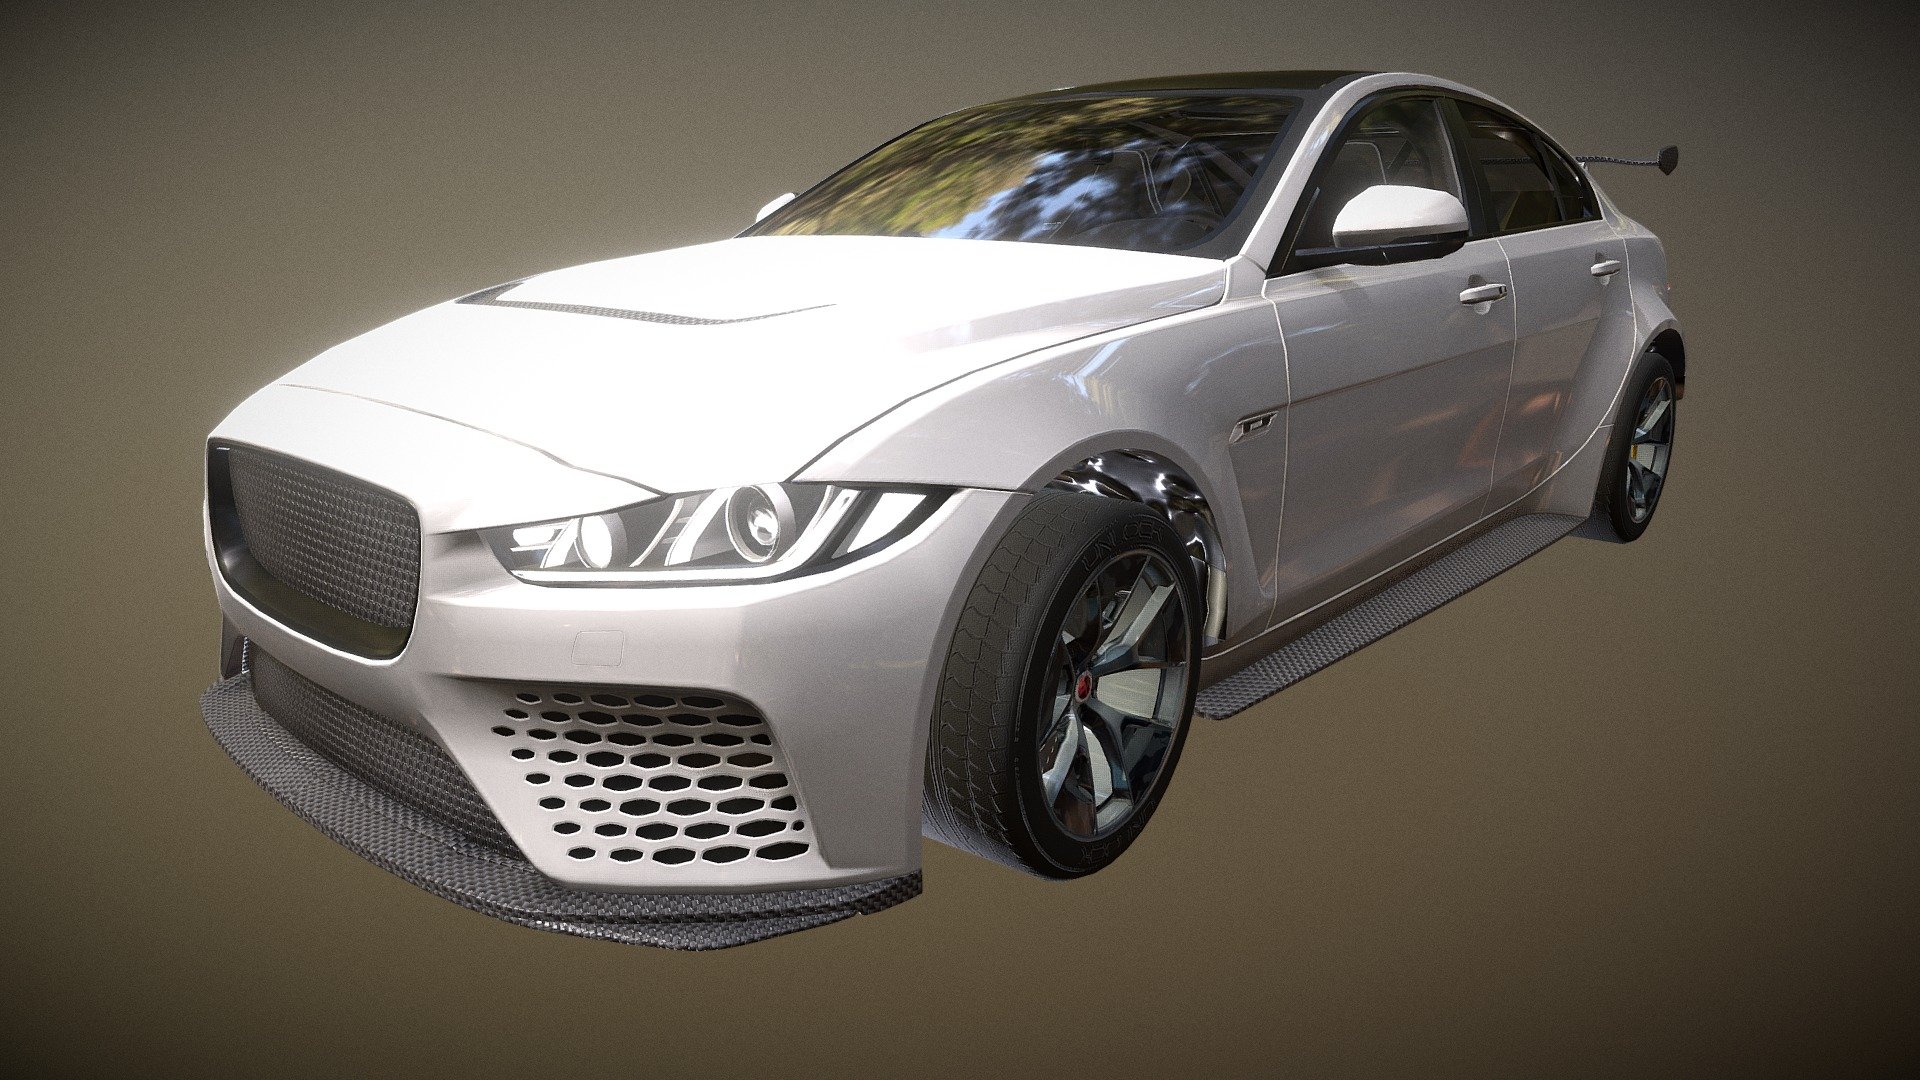 Subscribe and like my videos! - YouTube

https://www.youtube.com/watch?v=L_N1_kSj28Y&amp;feature=youtu.be

Sports car model for game.

Unity Asset Store URL:

Coming soon, awaiting review of the asset store team.
 - Unlock Sports Car 05 - 3D model by UnlockGameAssets 3d model